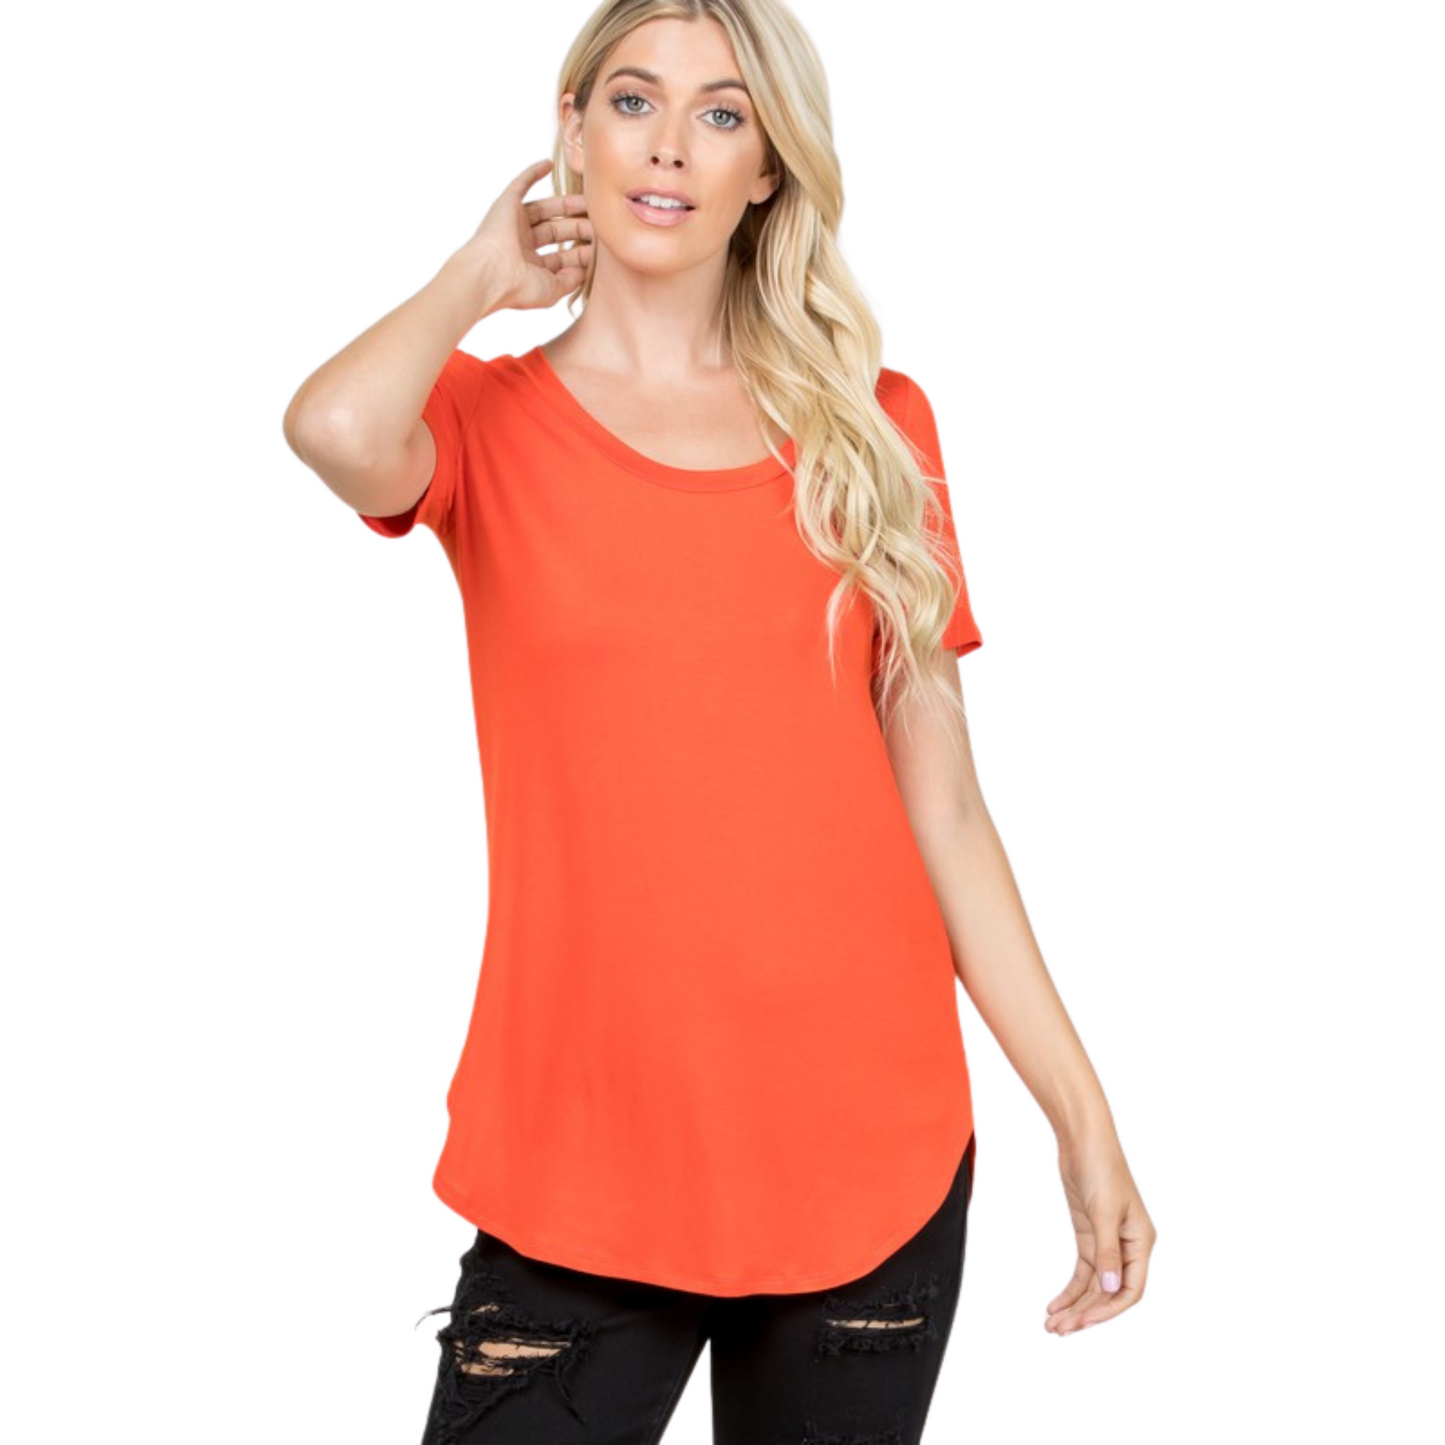 This Scoop Neck Top is a summer essential, crafted with butter soft lightweight fabric for breathable comfort. It comes in a variety of beautiful colors, with short sleeves for an airy feel. This top is sure to become a staple in your wardrobe.